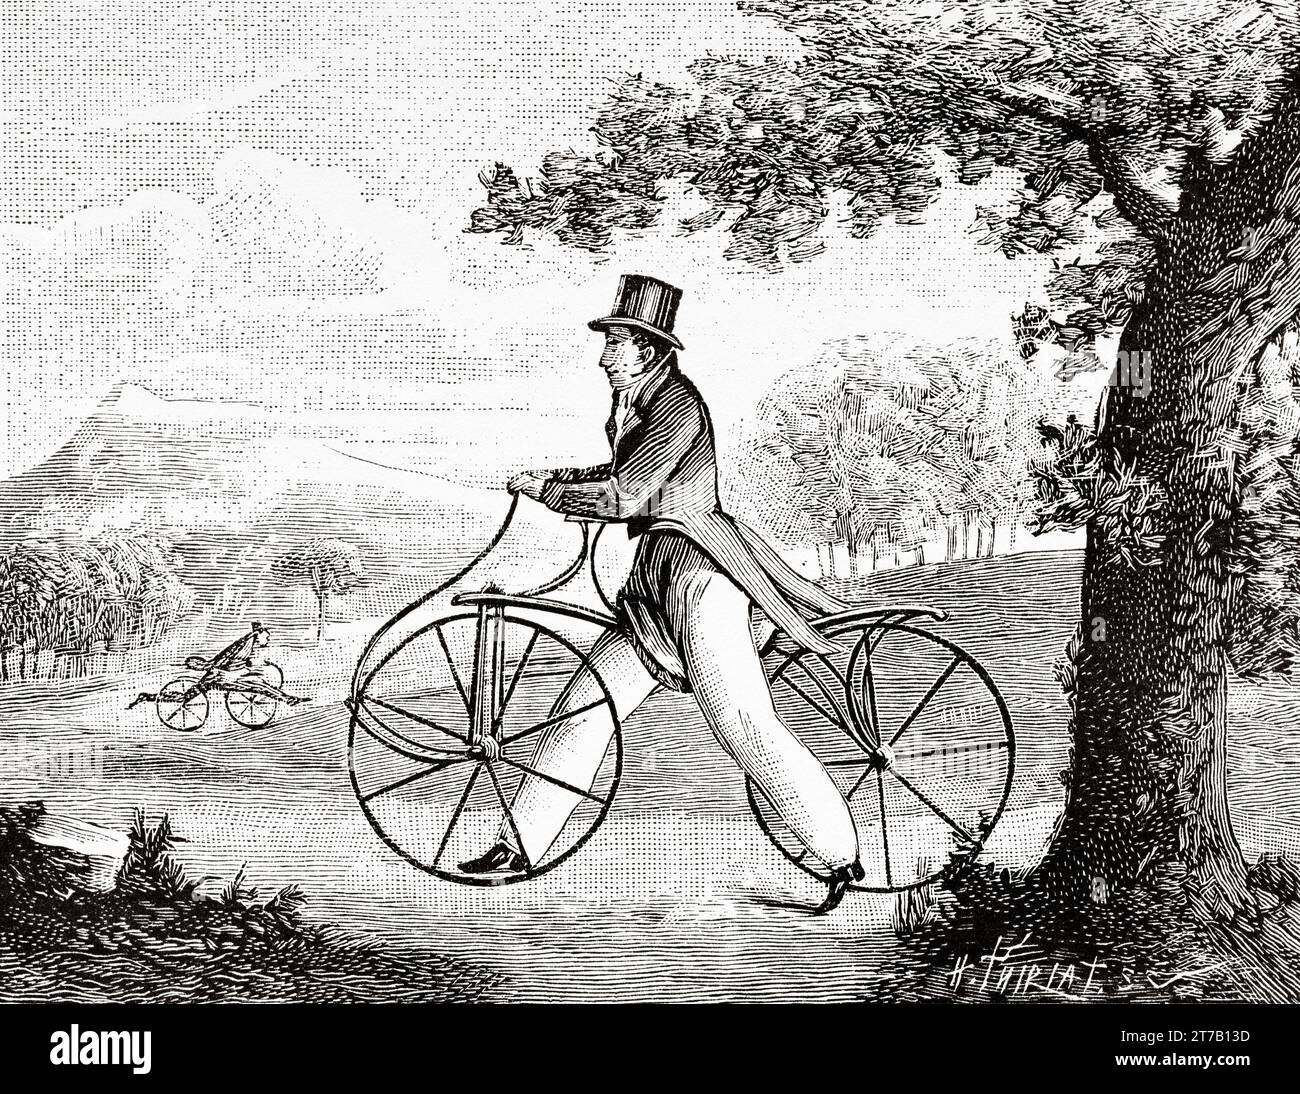 The Draisine. Pedestrian Curricle invented by Karl von Drais de Sauerbrun in 1816, introduced into the United States in 1819. Old illustration from La Nature 1887 Stock Photo